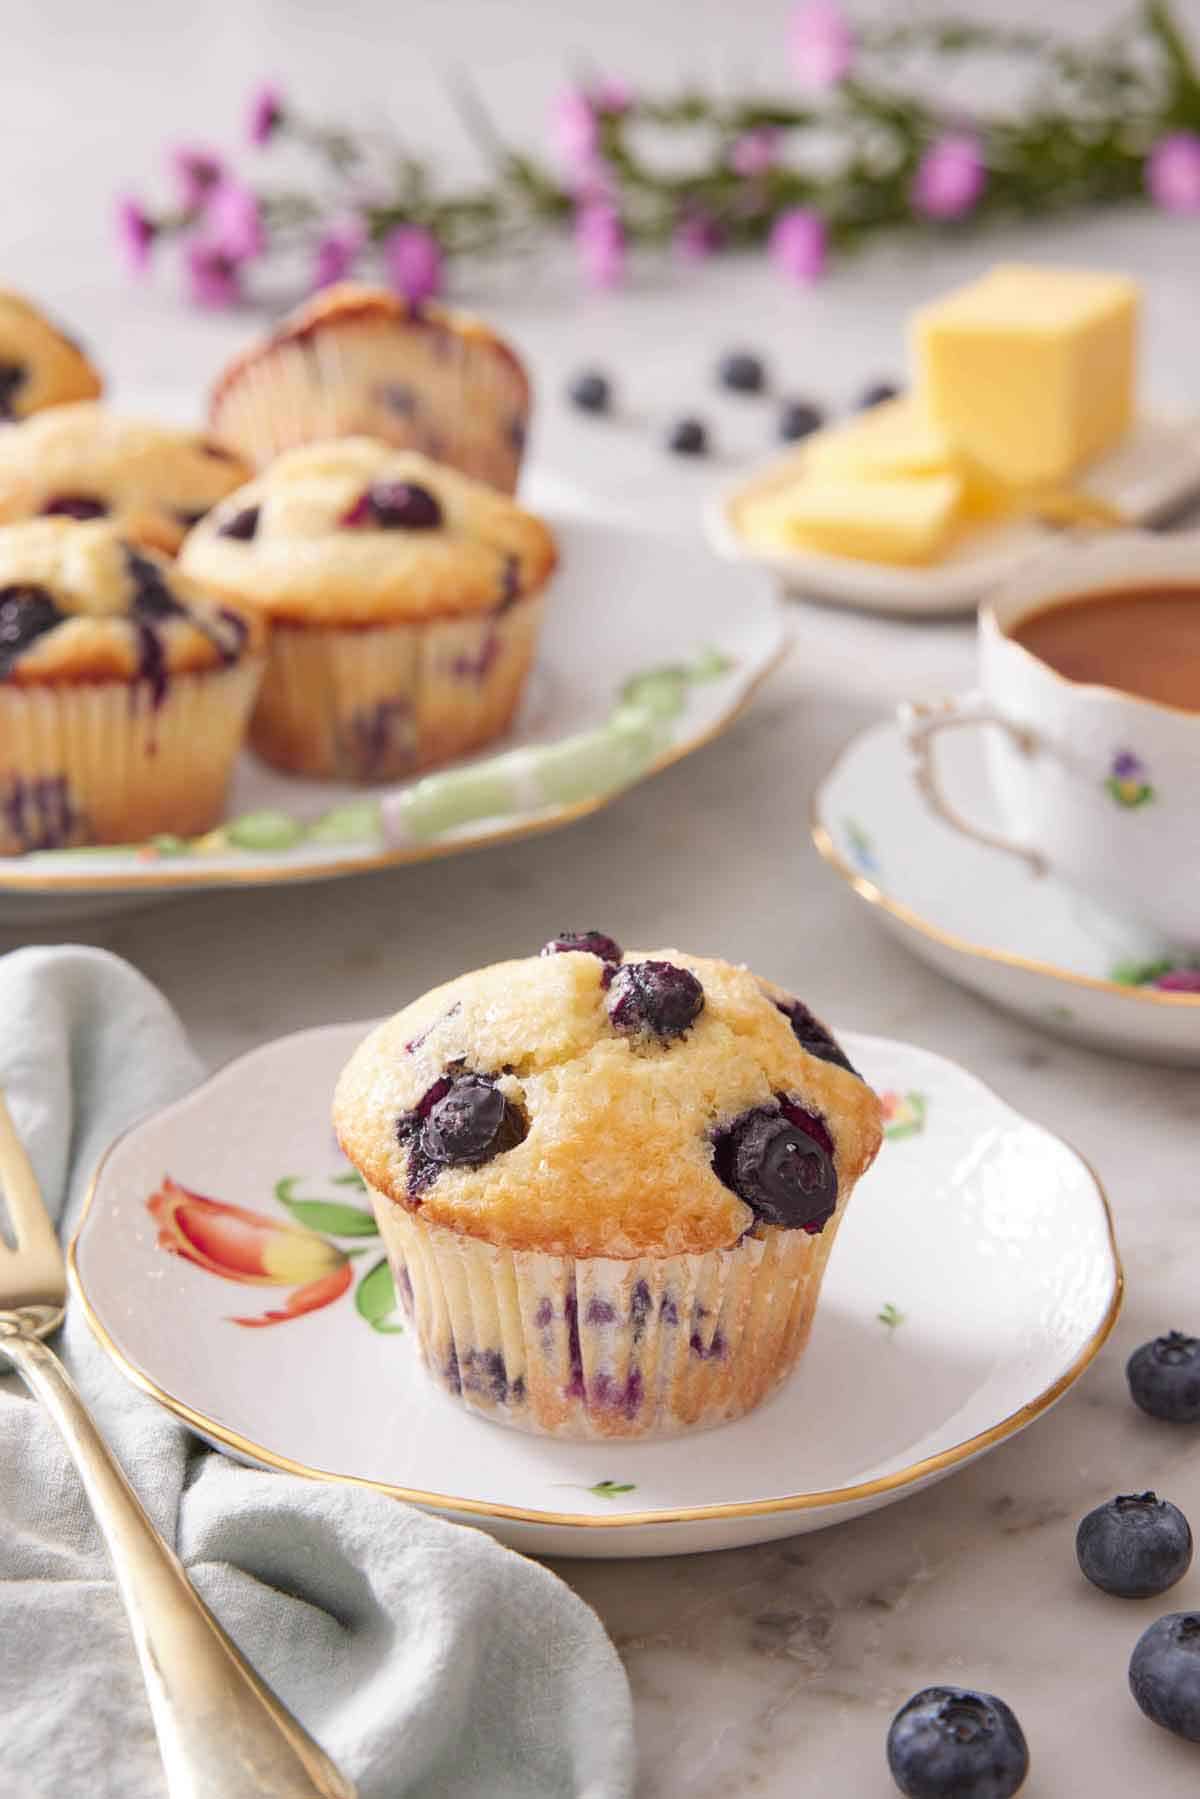 A plate with a blueberry muffin with additional muffins in the background along with a cup of coffee and butter.